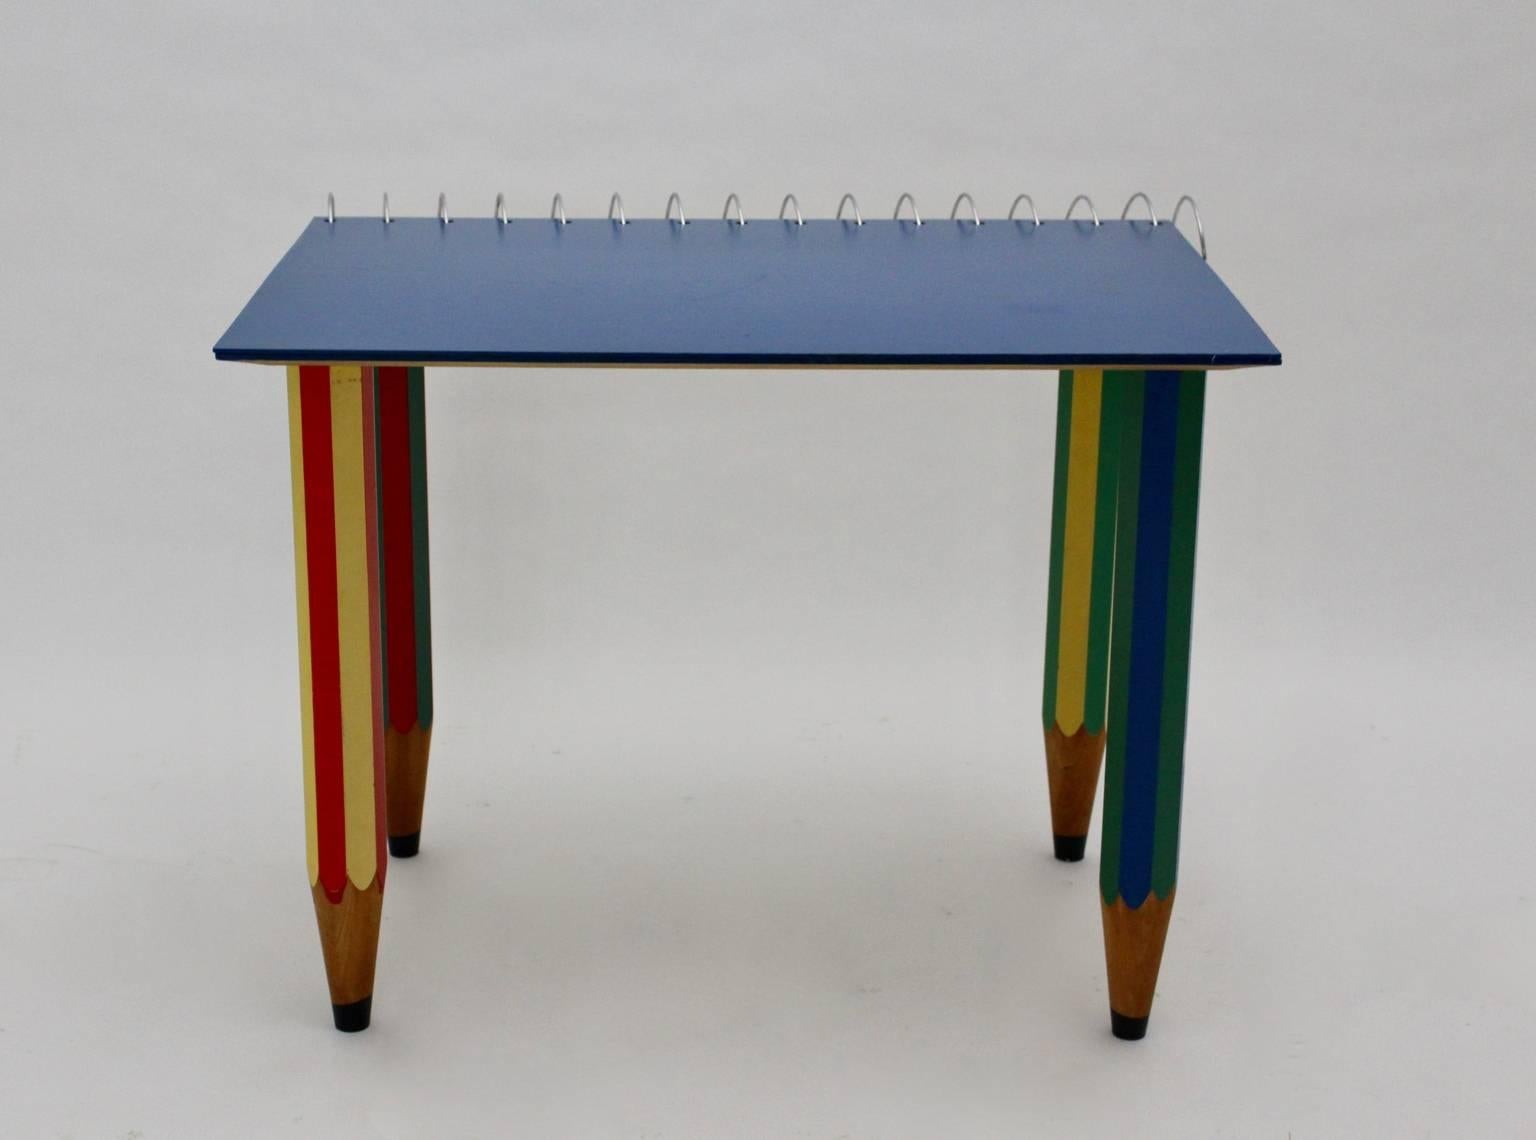 Pop art desk in different colors like blue, yellow and red designed by Pierre Sala ( 1948 - 1989 ) and executed by Pierre Sala Furniture, 1983.
It has feet made of spruce in different colors and shaped like pencils.
The blue colored top is foldable